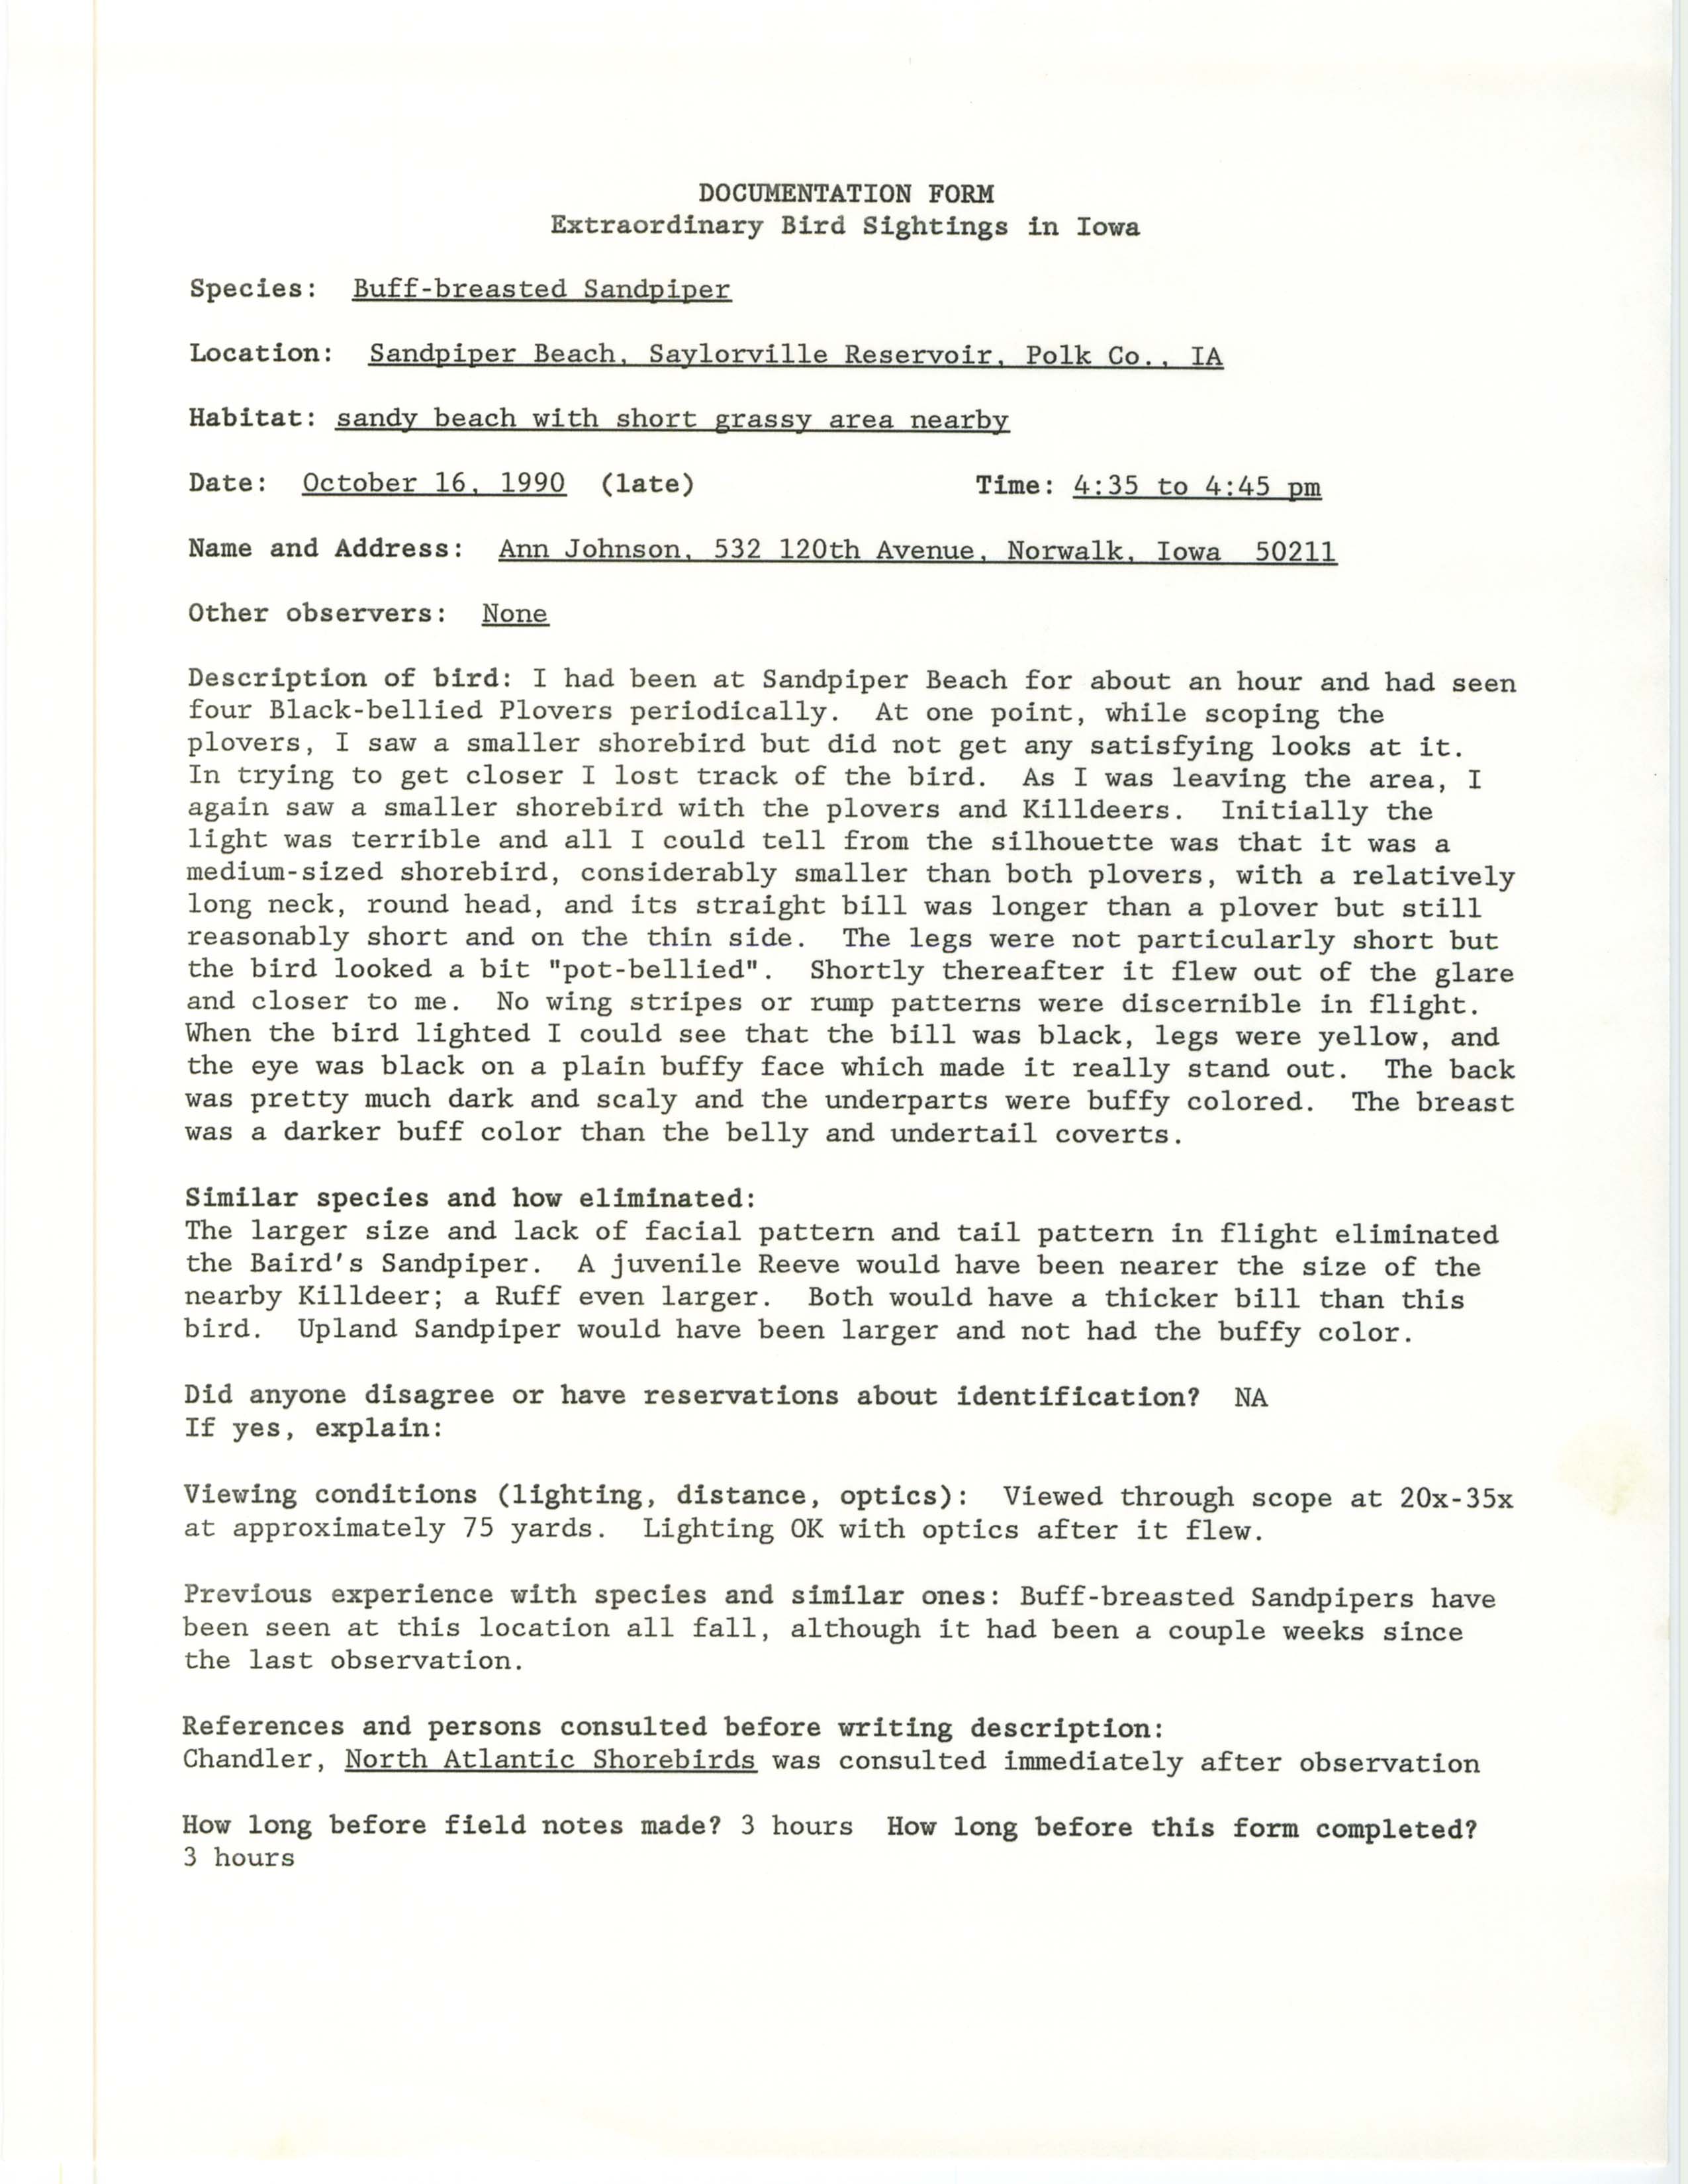 Rare bird documentation form for Buff-breasted Sandpiper at Sandpiper Beach at Saylorville Reservoir, 1990